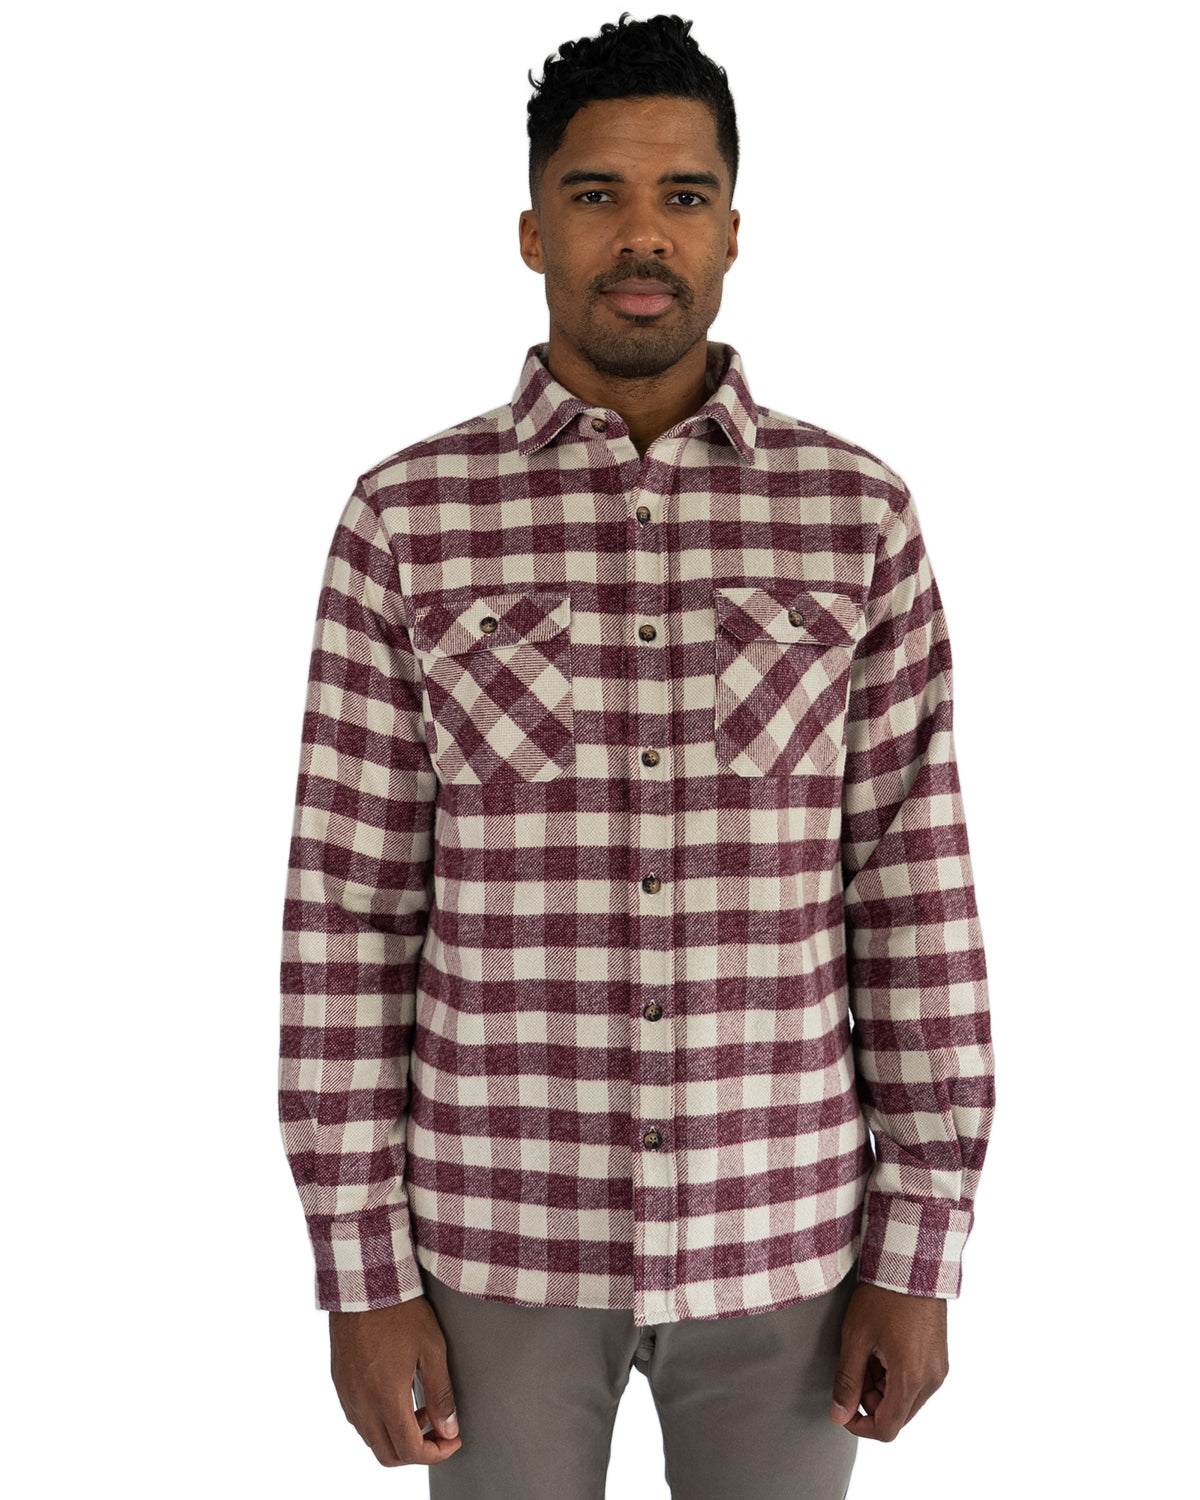 Soft Flannel Shirt for Men in 100% Cotton, The Grand Flannel in Currant ...